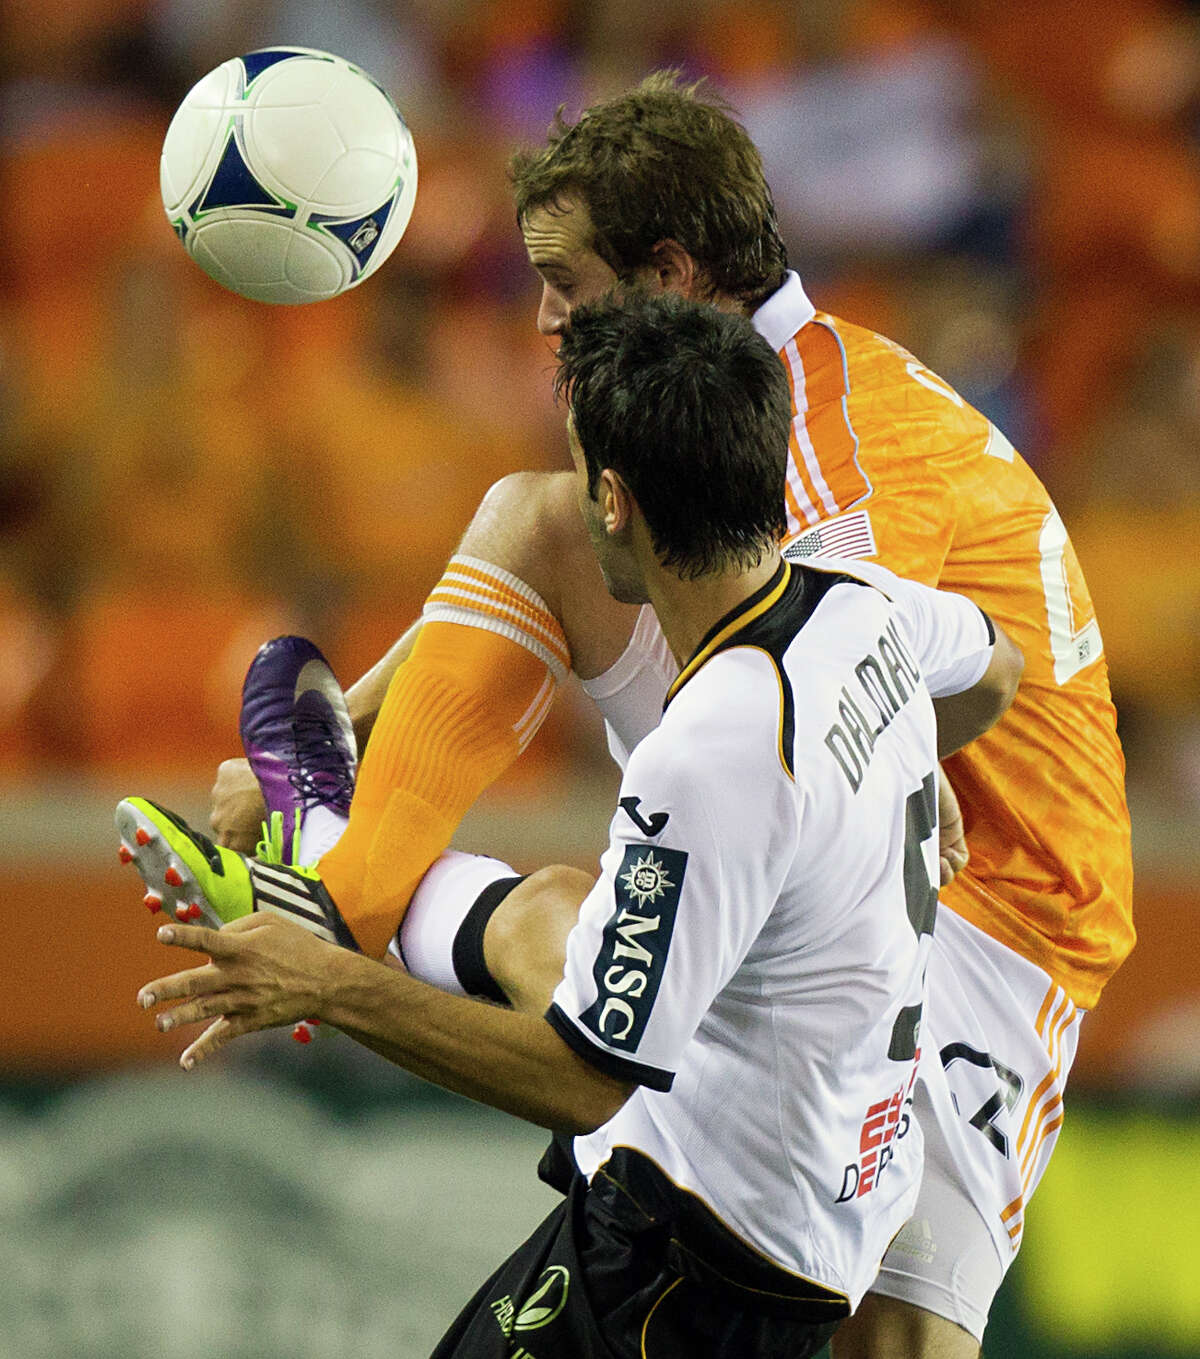 Houston Dynamo midfielder Brian Ownby (22) gets tangled with Valencia midfielder Alert Dalmau (5) during second half of the BBVA Compass Dynamo Charities Cup friendly soccer match on Thursday, May 31, 2012, at BBVA Compass Stadium in Houston. Valencia won the game 2-1.